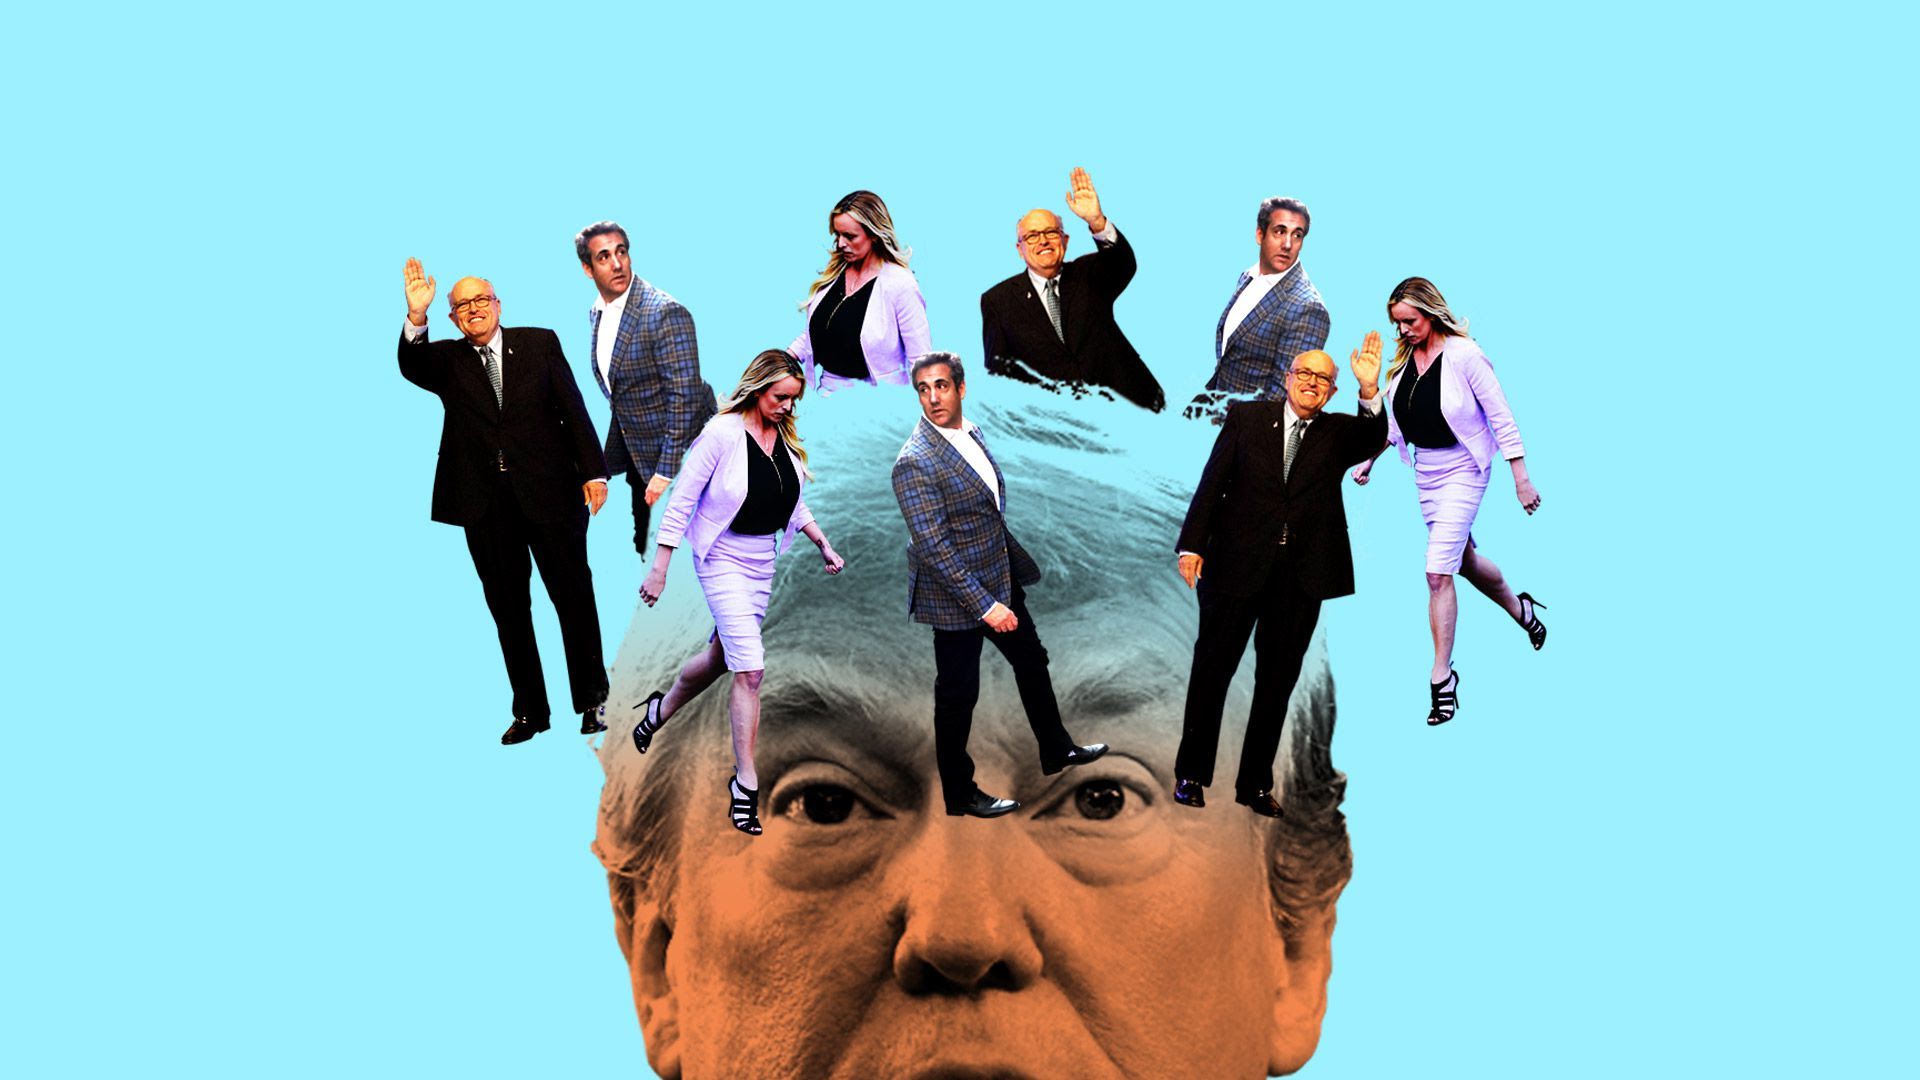 An illustration of Stormy Daniels, Michael Cohen and Rudy Giuliani circling Trump's head